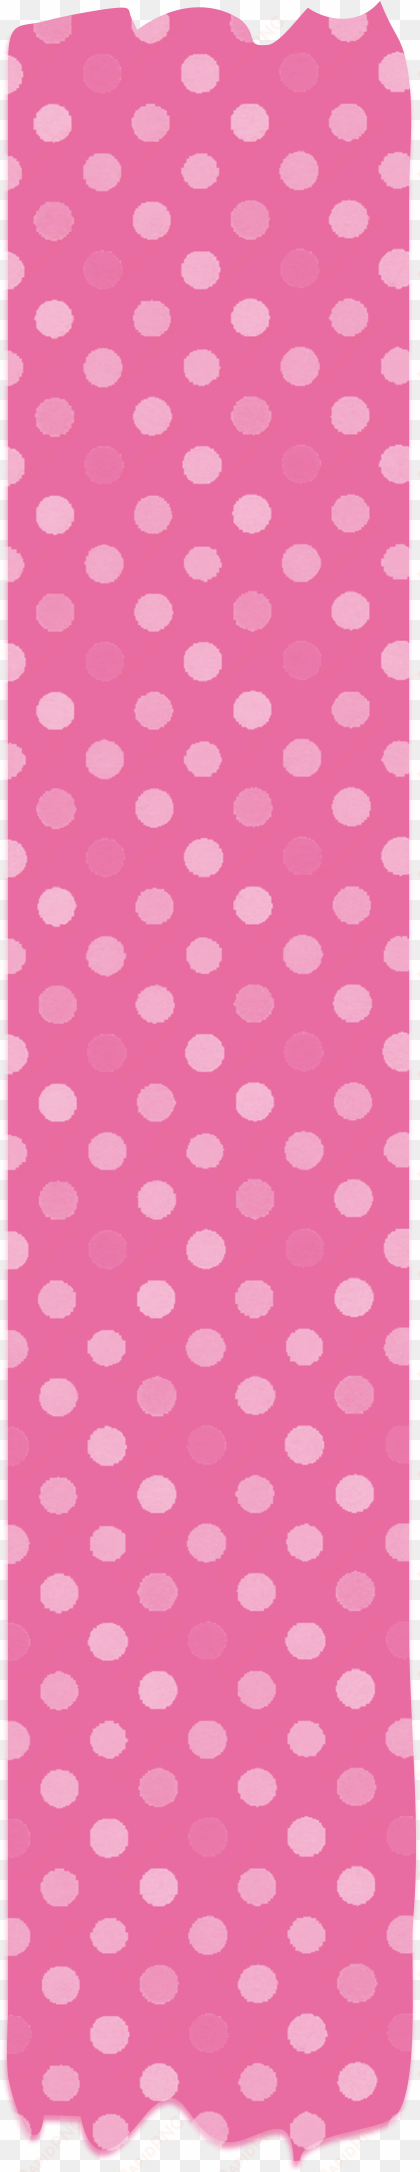 clip arts related to - polka dot